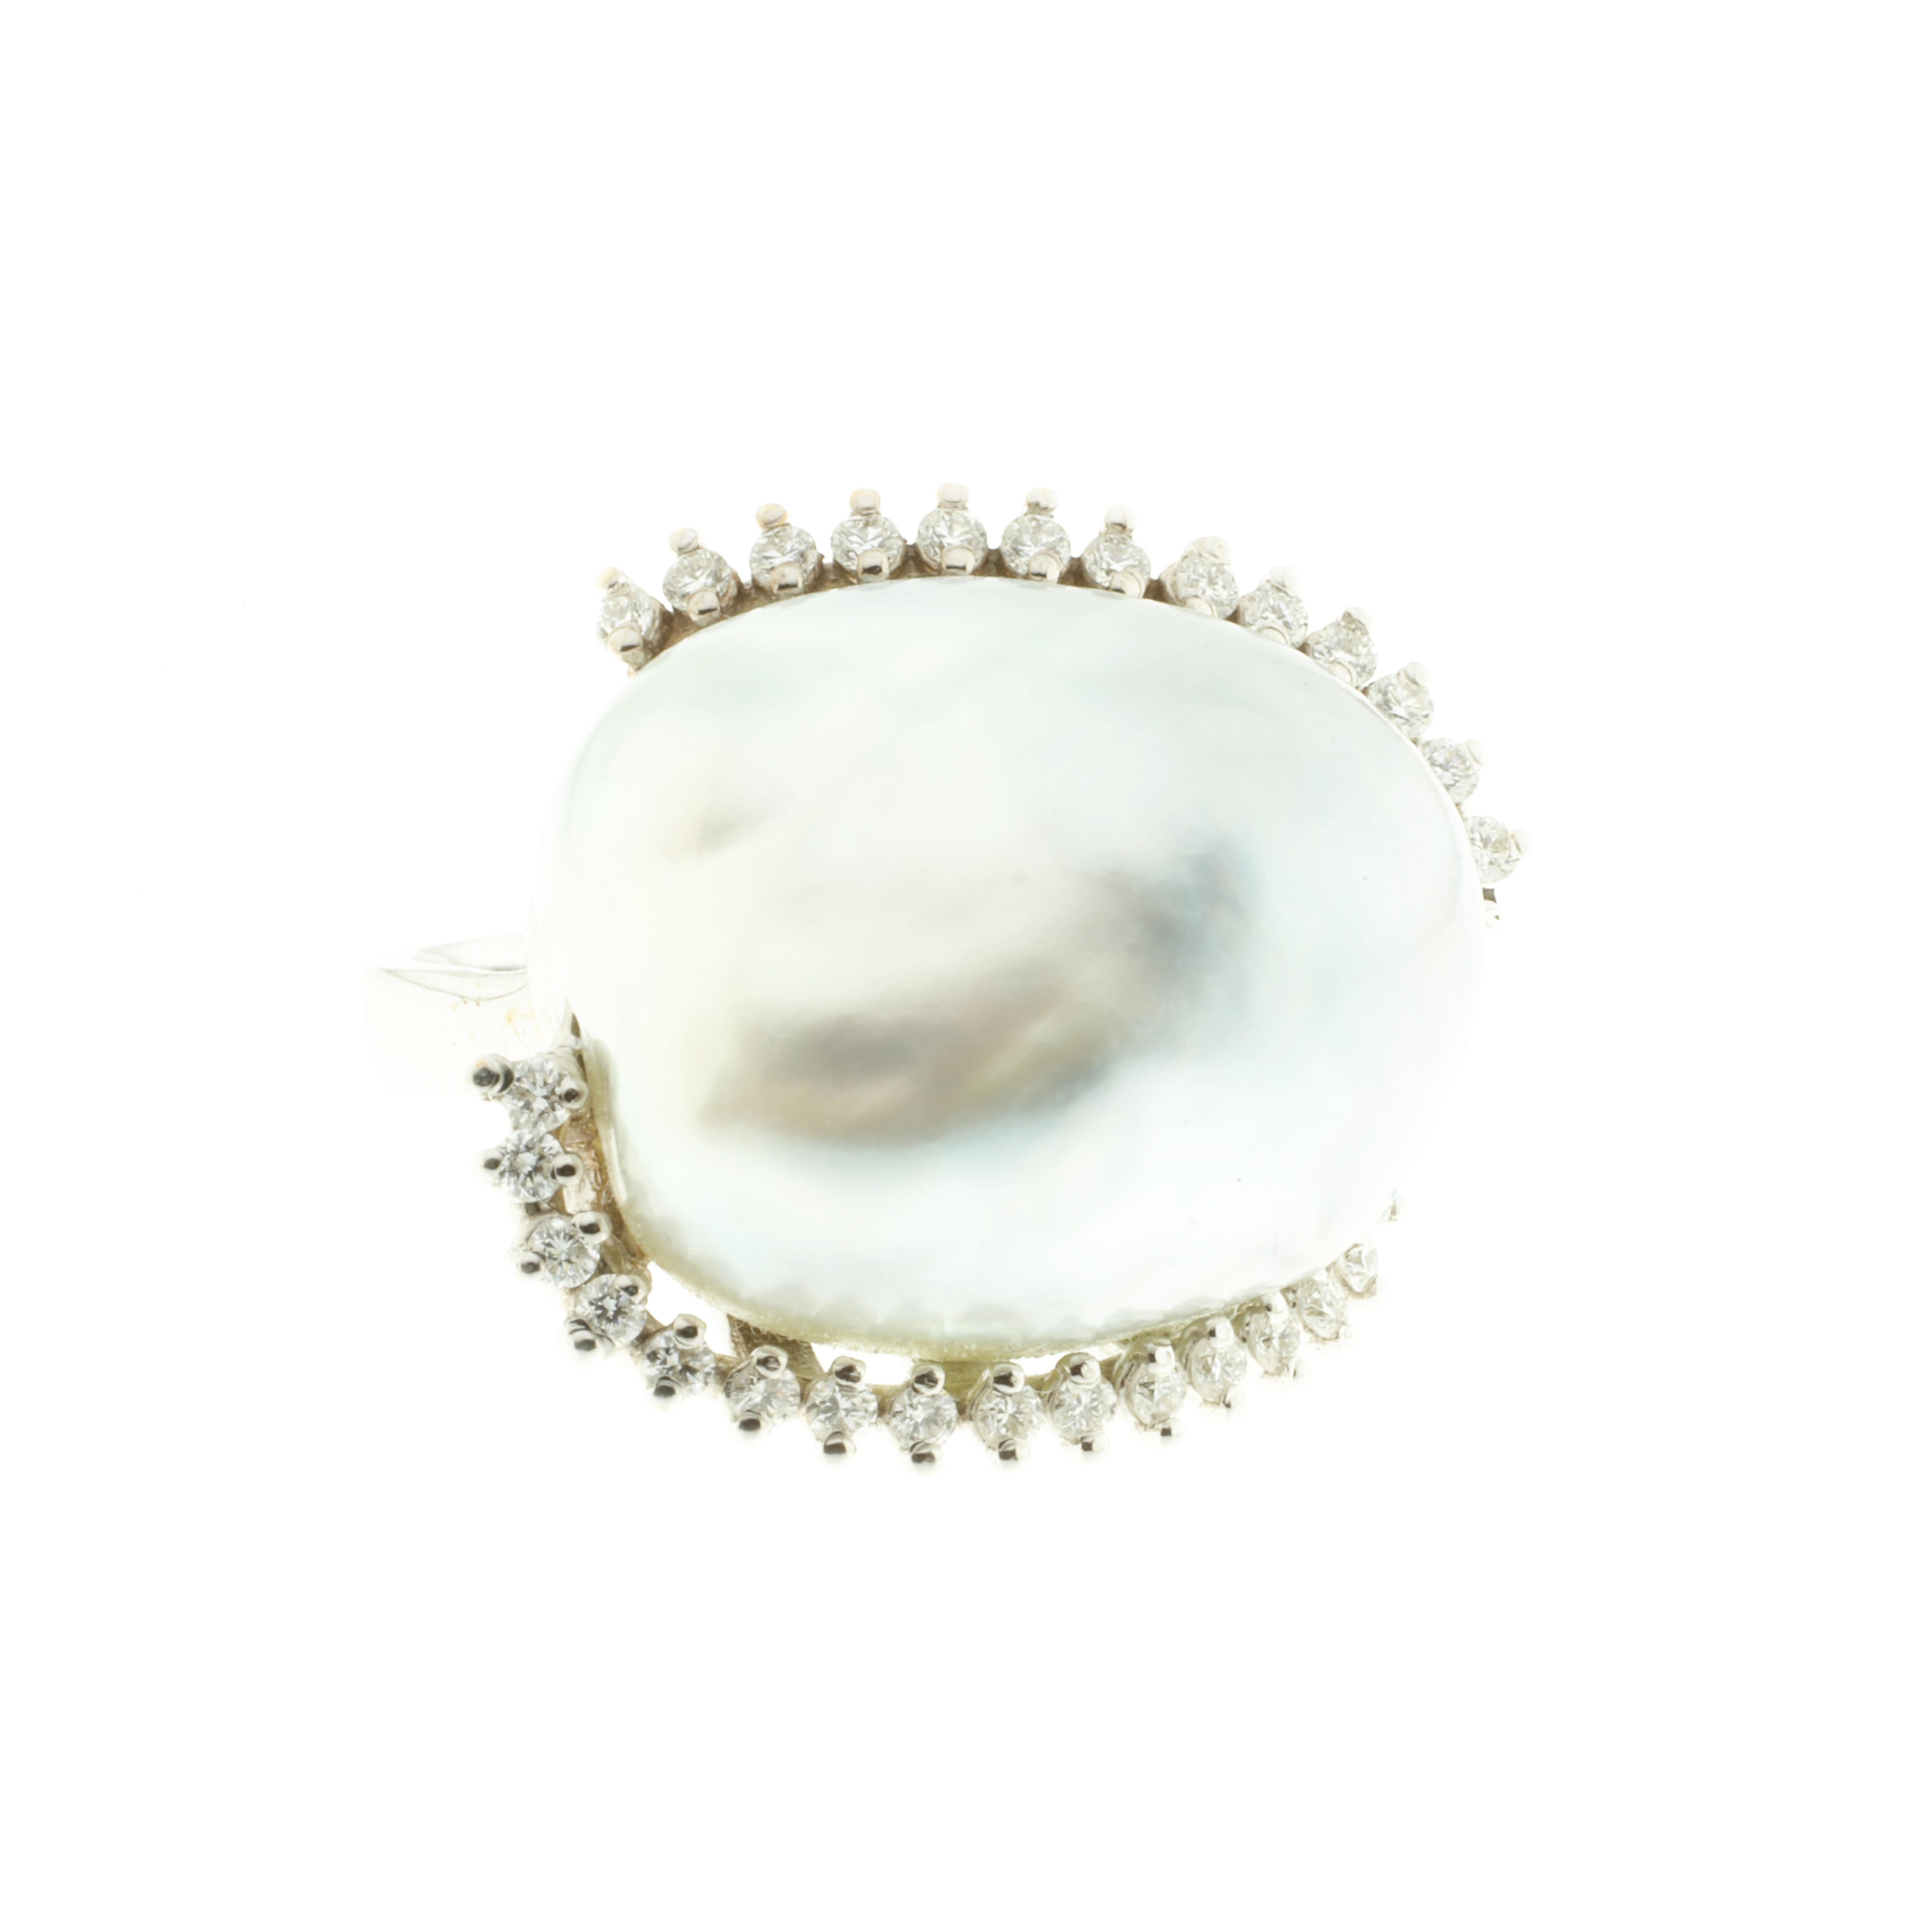 A stunning cocktail ring that is glamorous both on and off the hand: it is daring and unusual in its design. Created from 18-karat white gold, this ring features a massive 29.4-carat Australian pearl, bordered by a single row of white diamonds, all